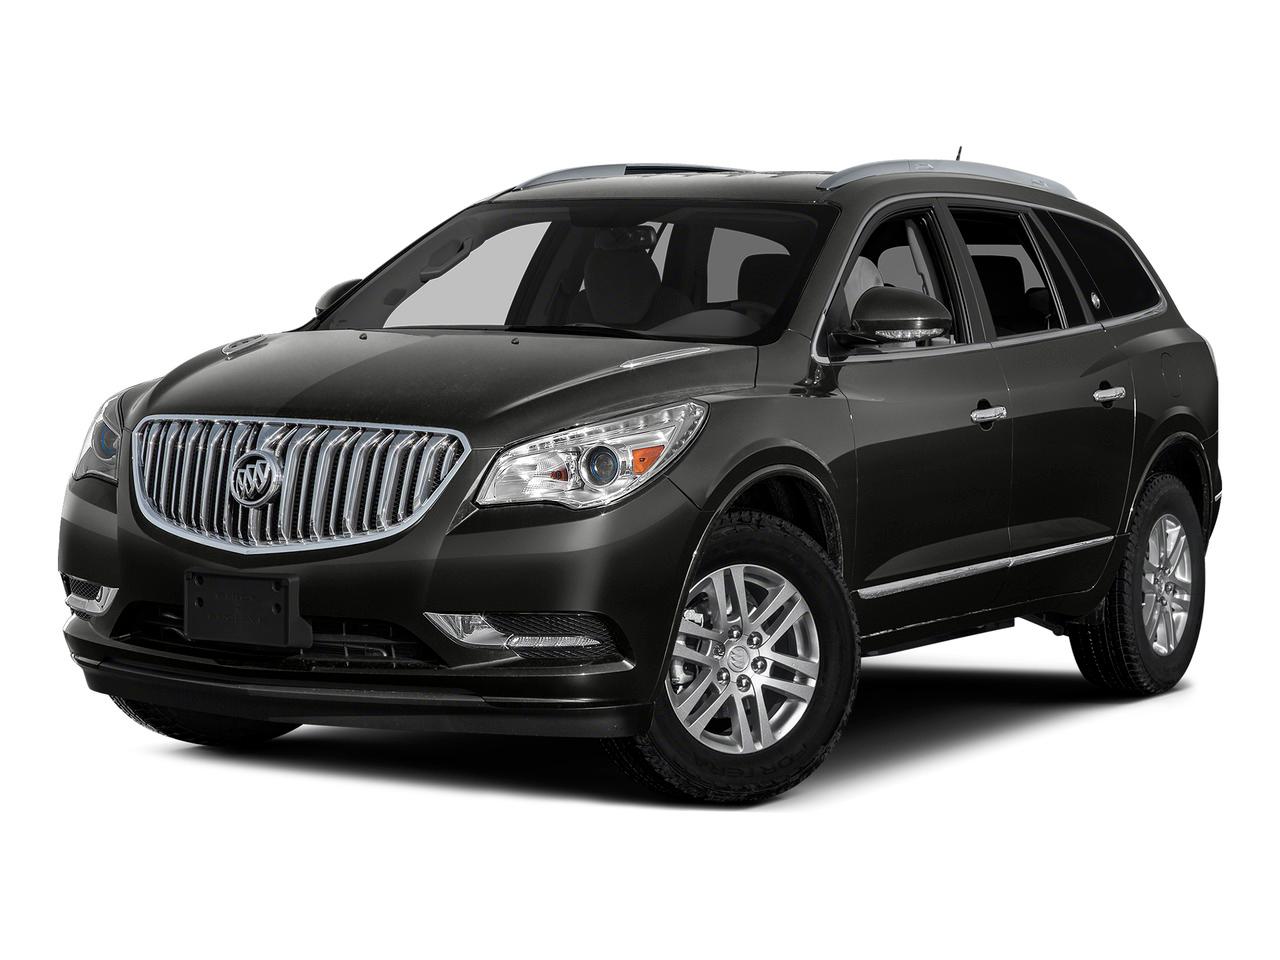 2016 Buick Enclave Vehicle Photo in Saint Charles, IL 60174